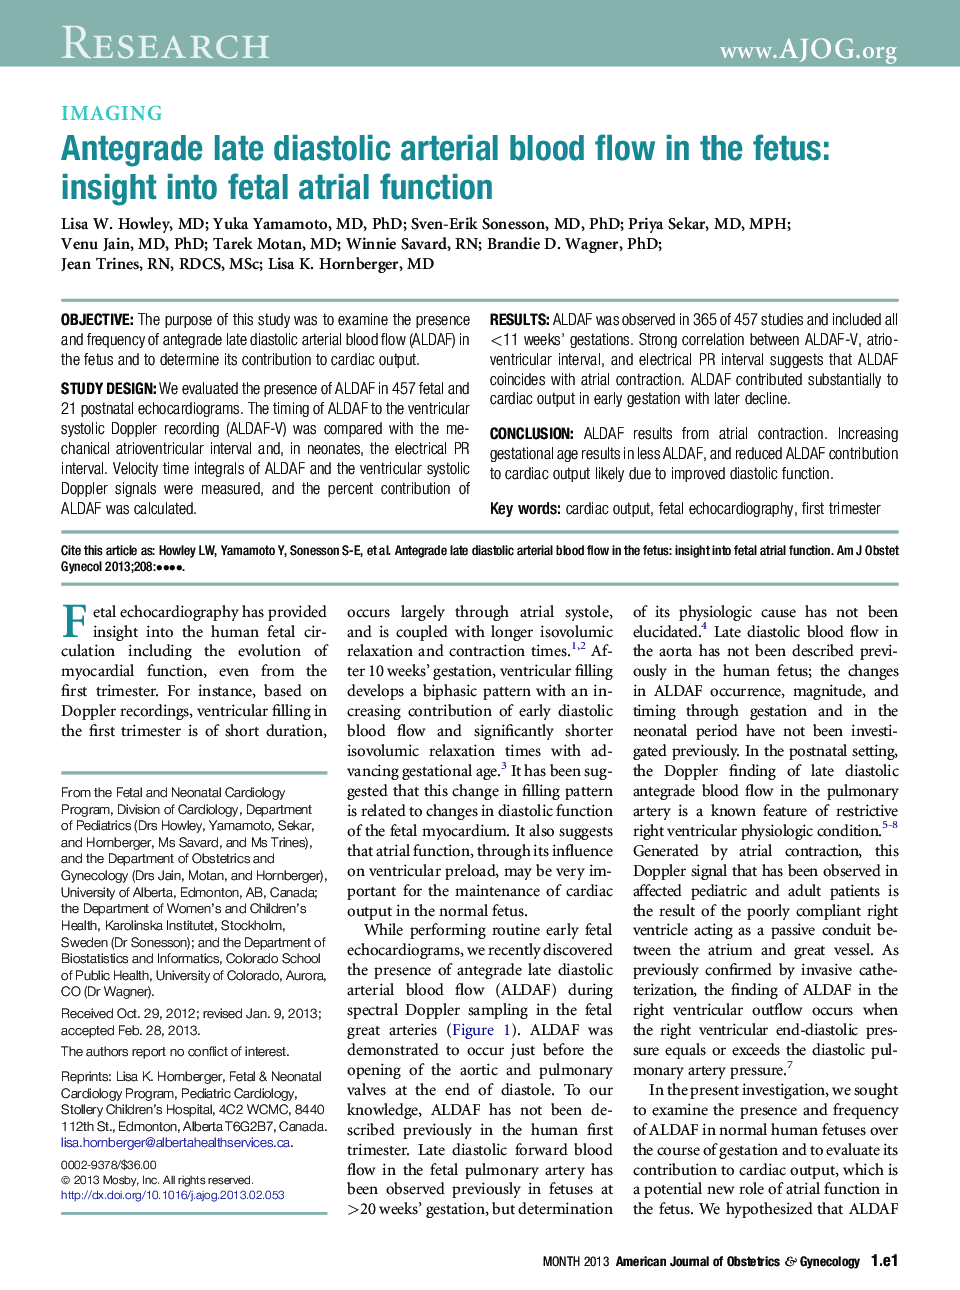 Antegrade late diastolic arterial blood flow in the fetus: insight into fetal atrial function